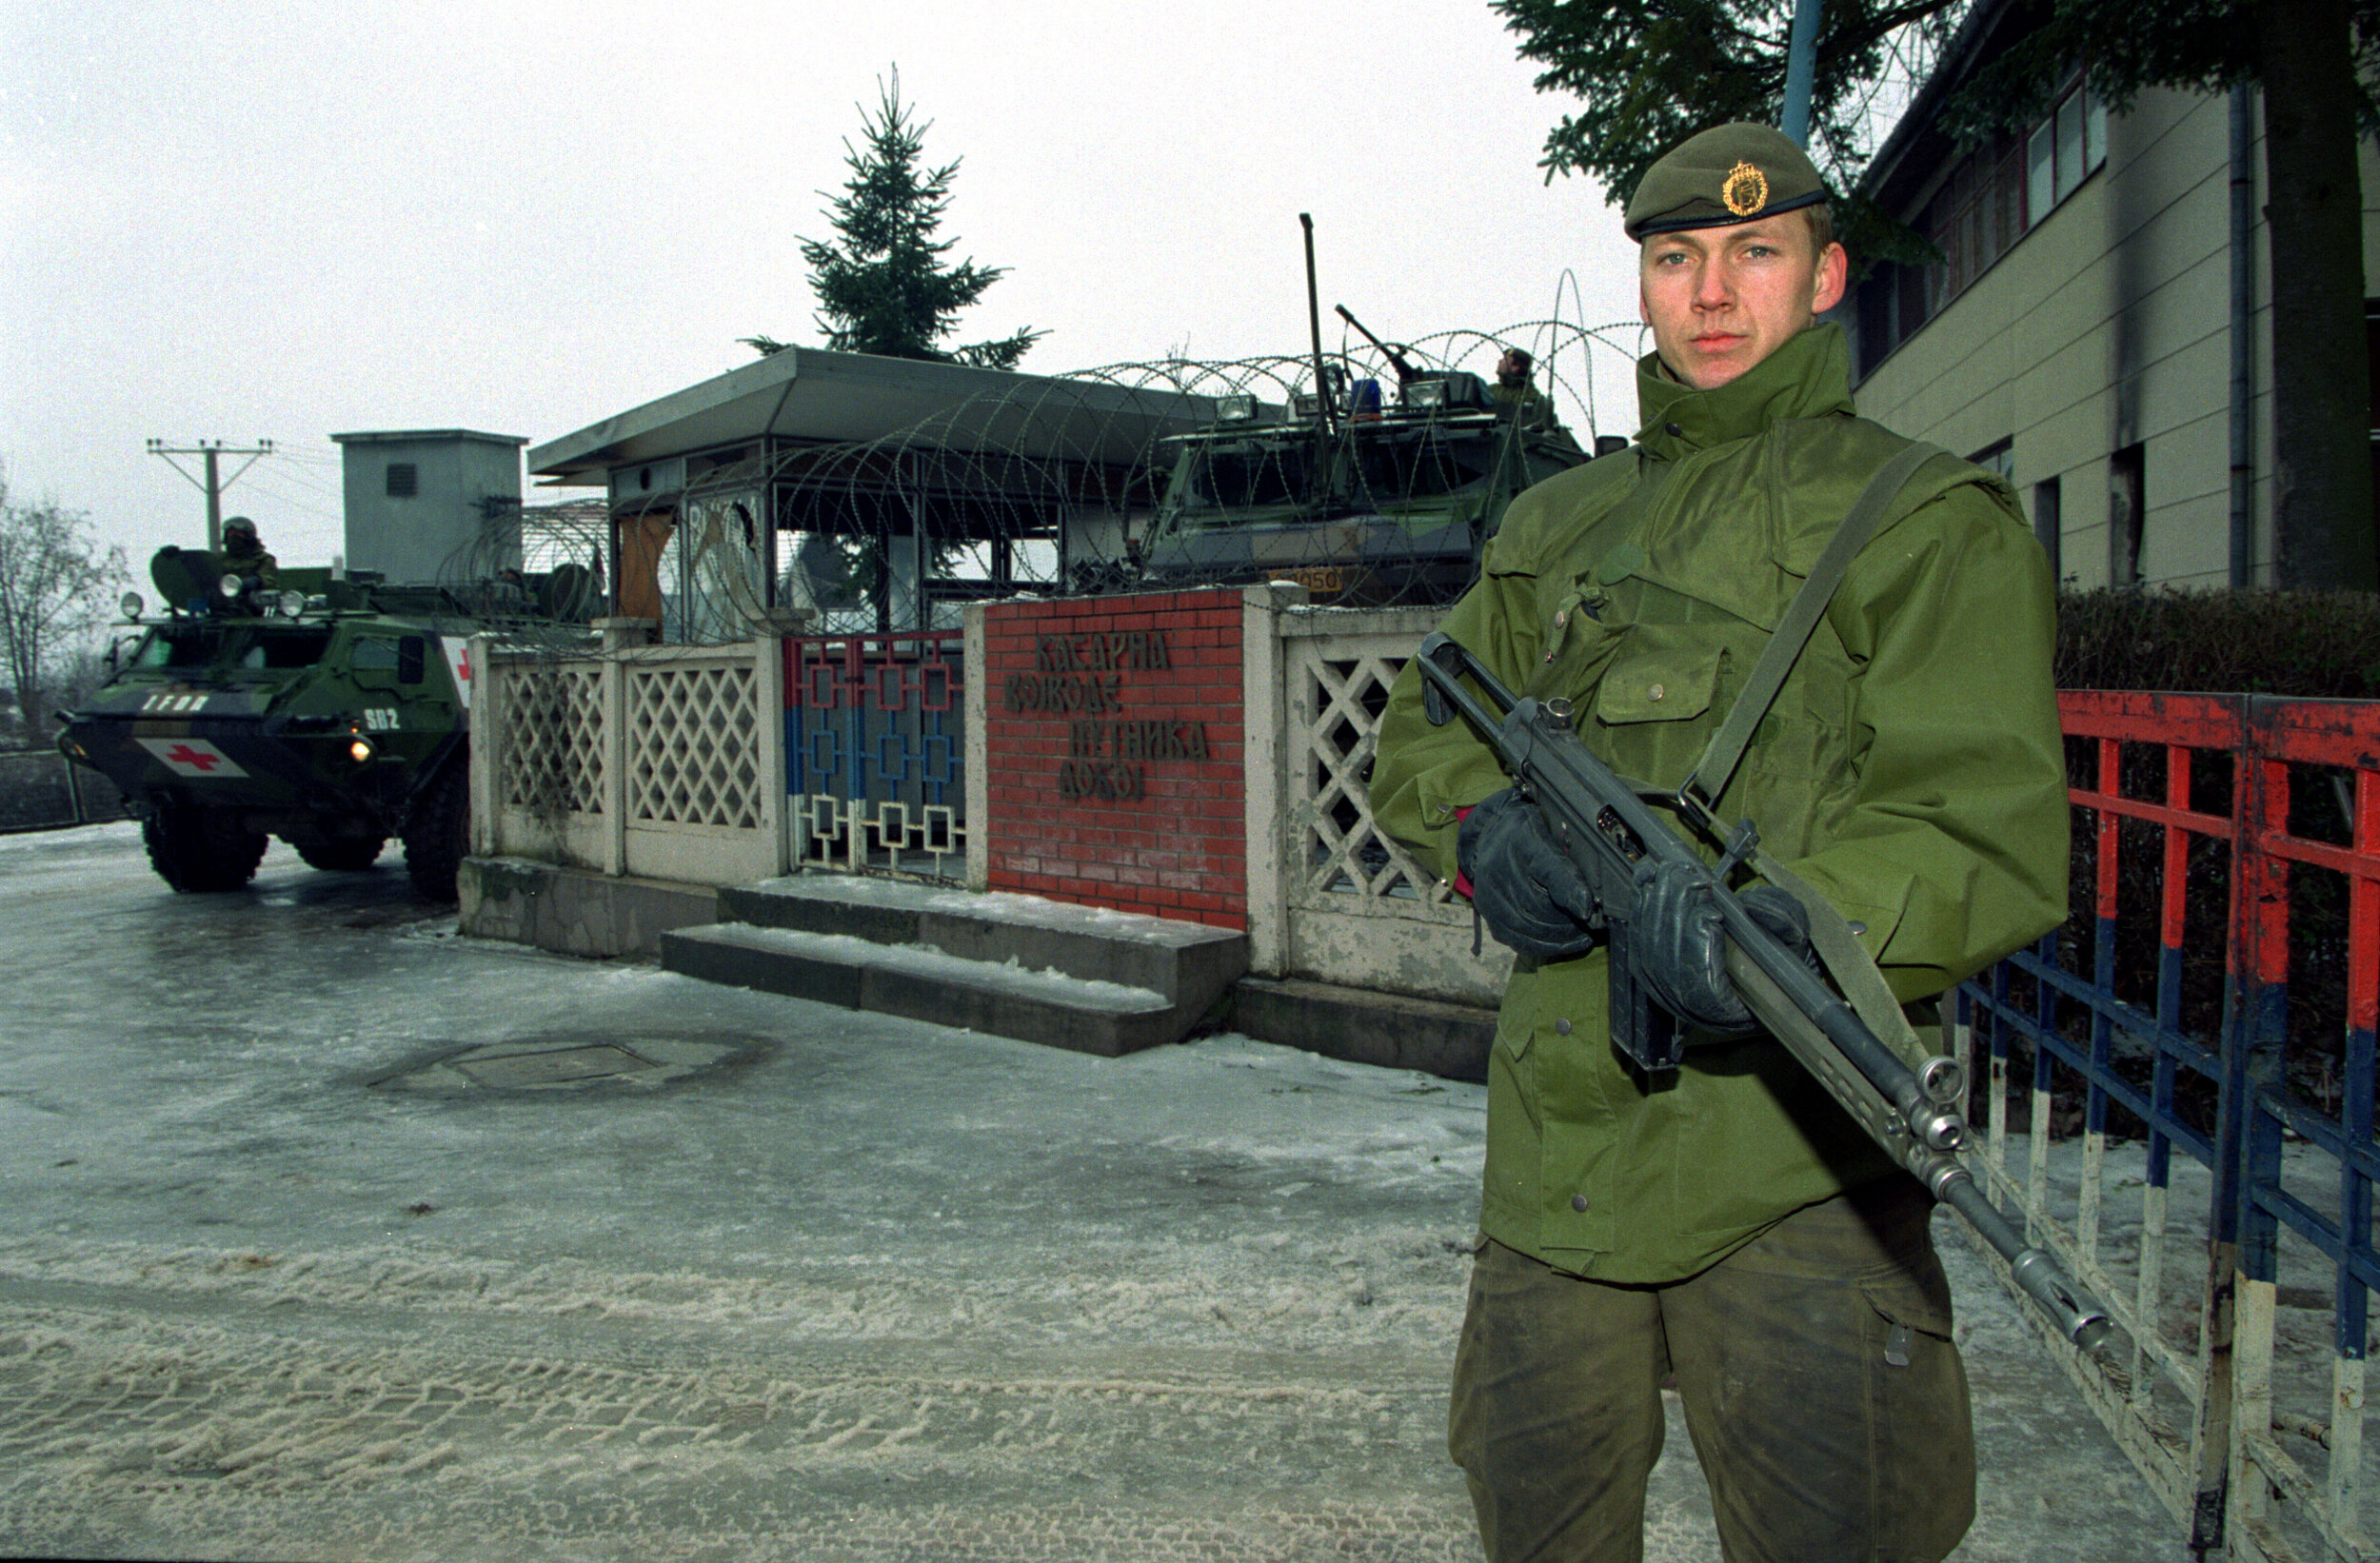  Norwegian soldier in Bosnia, 1996. Note the upgraded F1 pattern AG3 with collapsible stock 